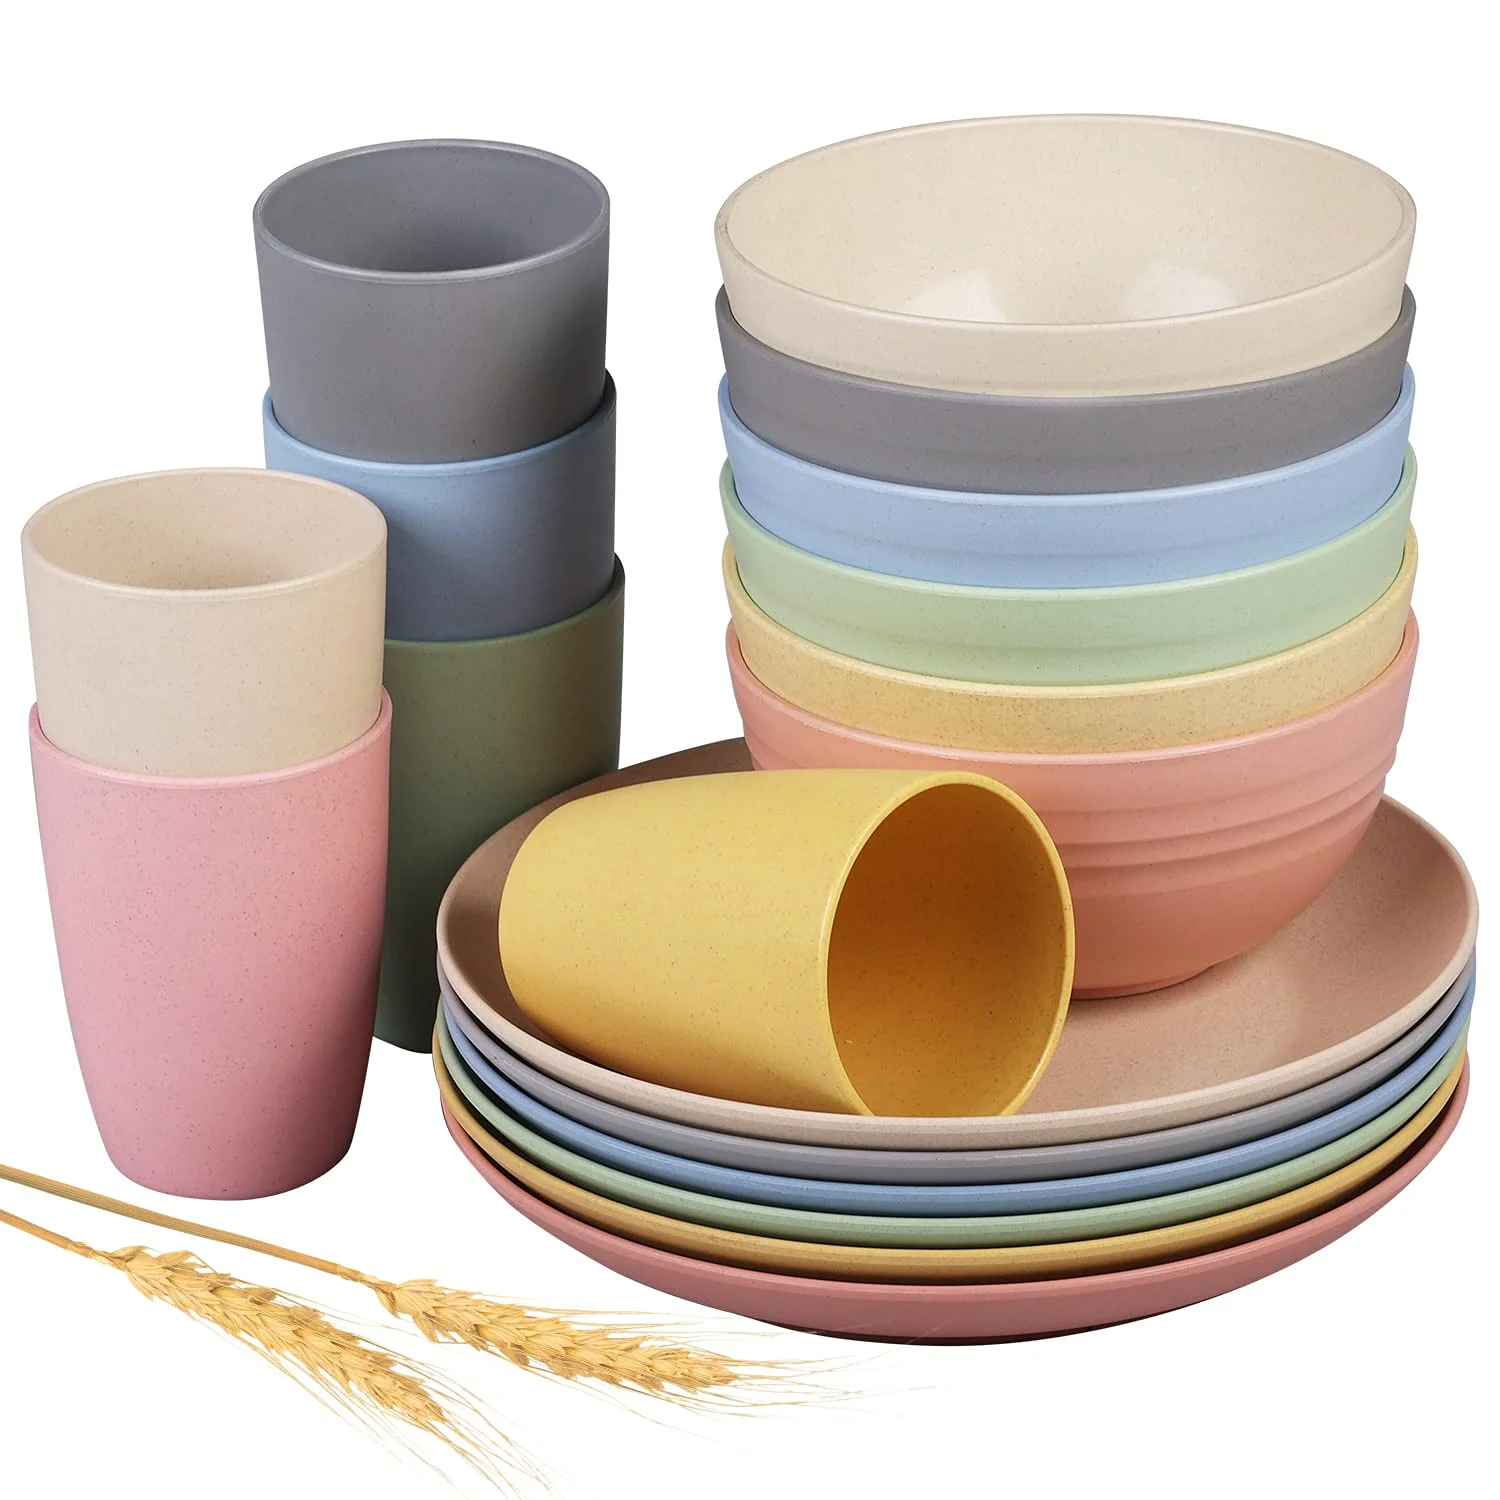 

tableware manufacture custom wholesales Reusable lightweight eco friendly Bowls Cups plates Wheat Straw Dinnerware Sets